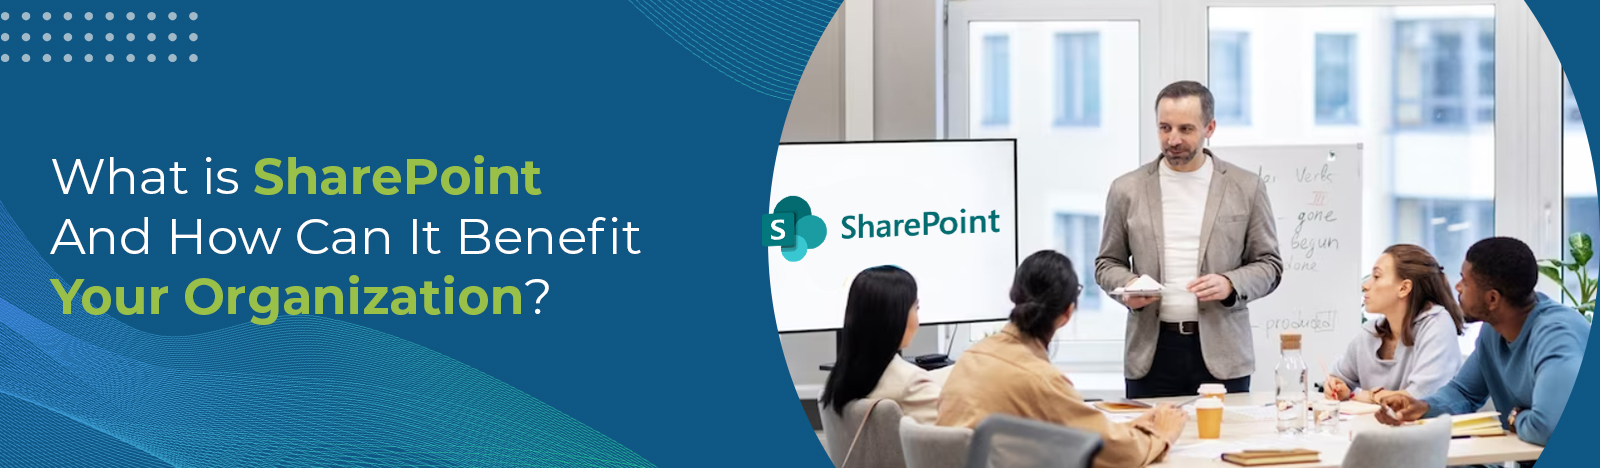 What is SharePoint and How Can It Benefit Your Organization?